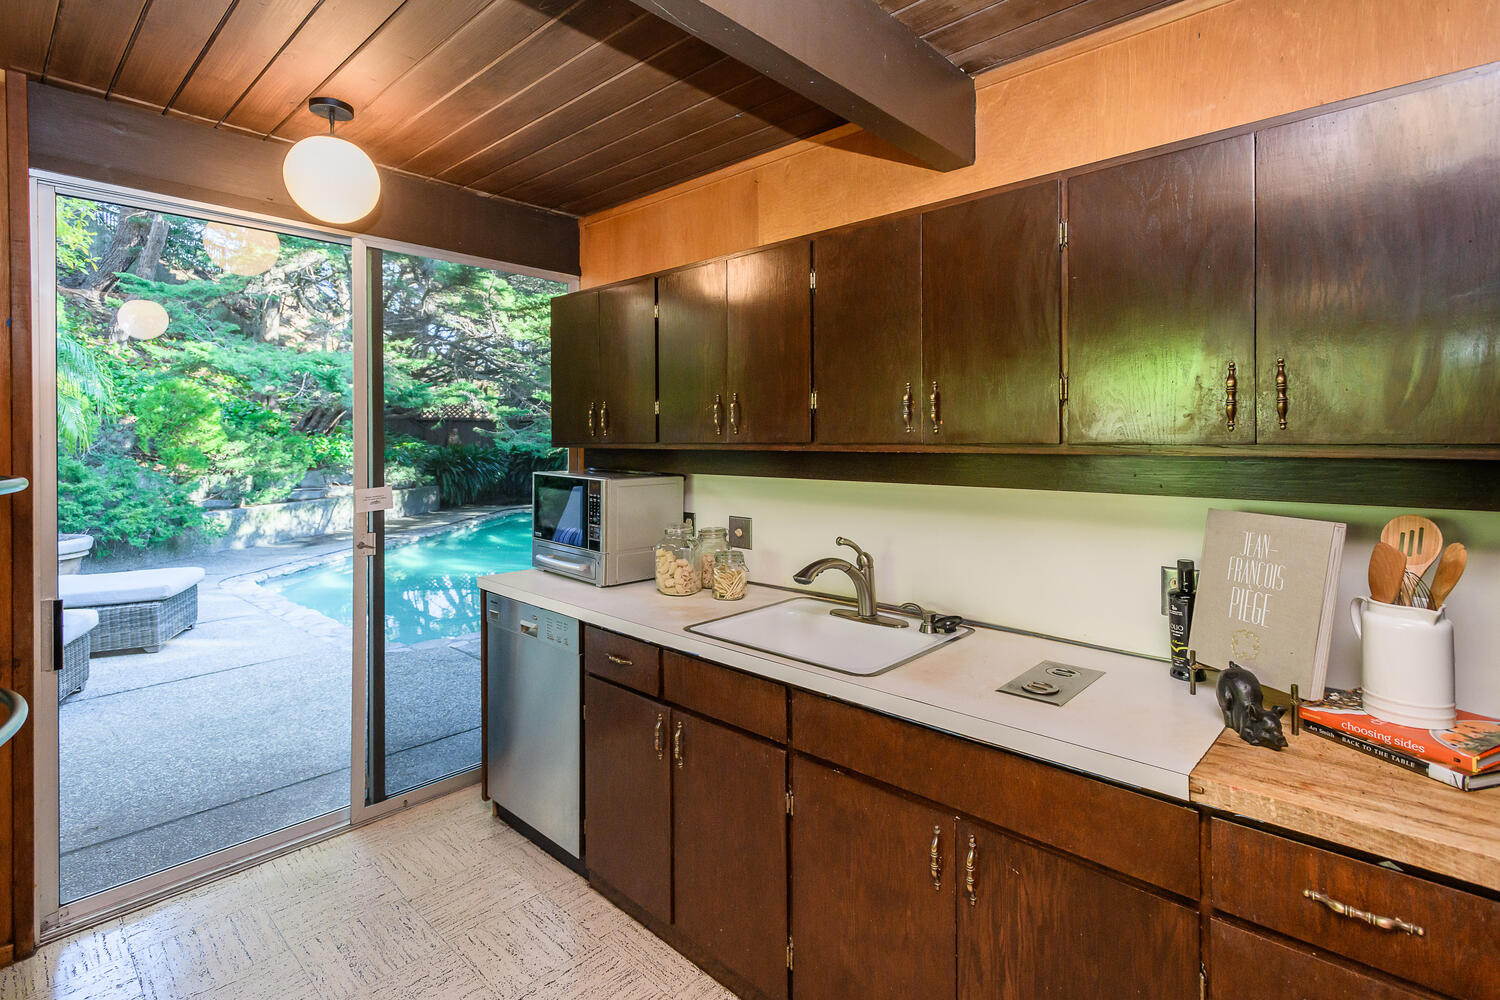 7 Mariposa Ct Kitchen cabinets in the Mills Estate area in Burlingame.